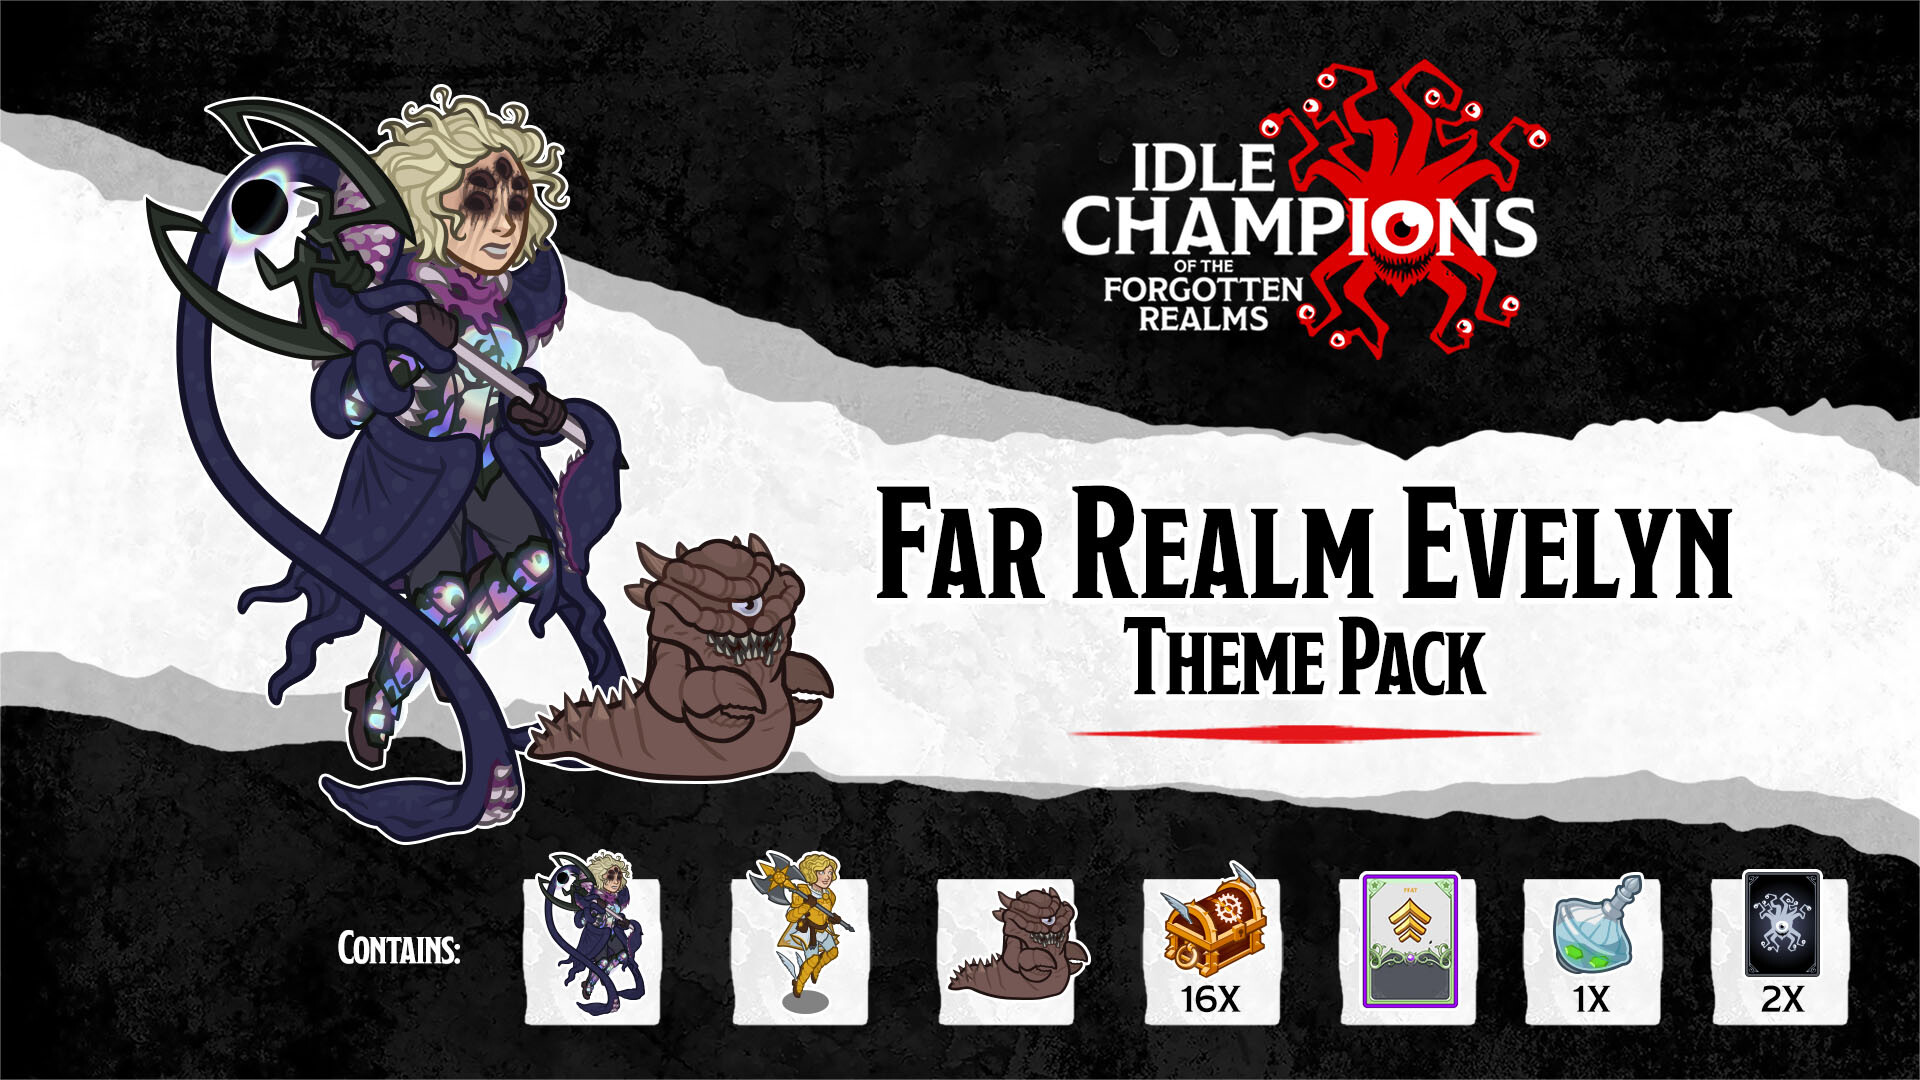 Idle Champions - Far Realm Evelyn Theme Pack Featured Screenshot #1